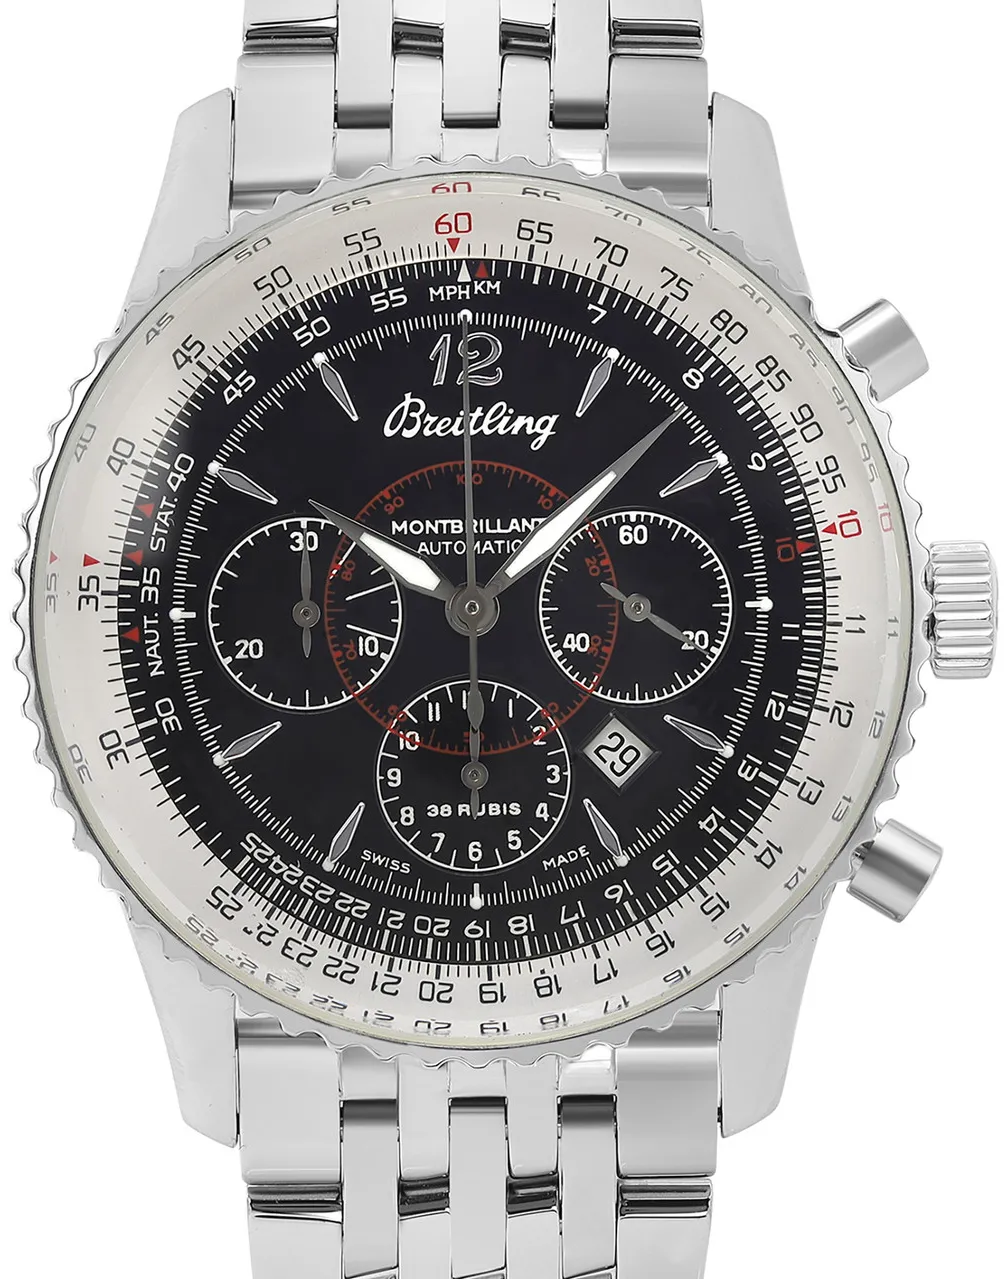 Breitling Montbrillant A41330 38mm Stainless steel Black 1